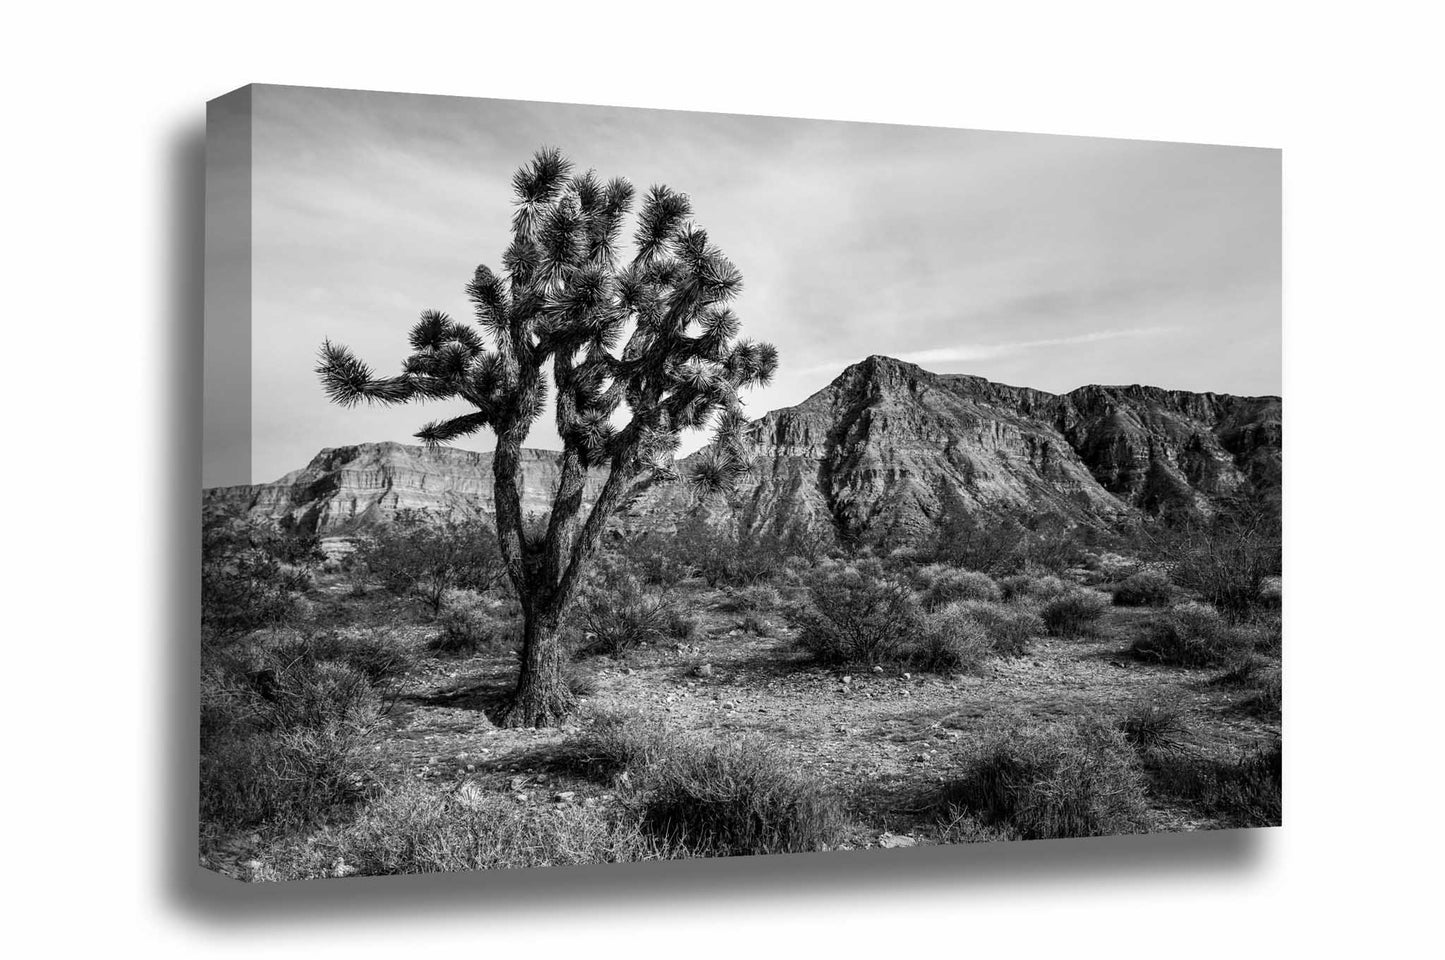 Desert canvas wall art of a Joshua Tree and mountain in the desert of western Arizona in black and white by Sean Ramsey of Southern Plains Photography.